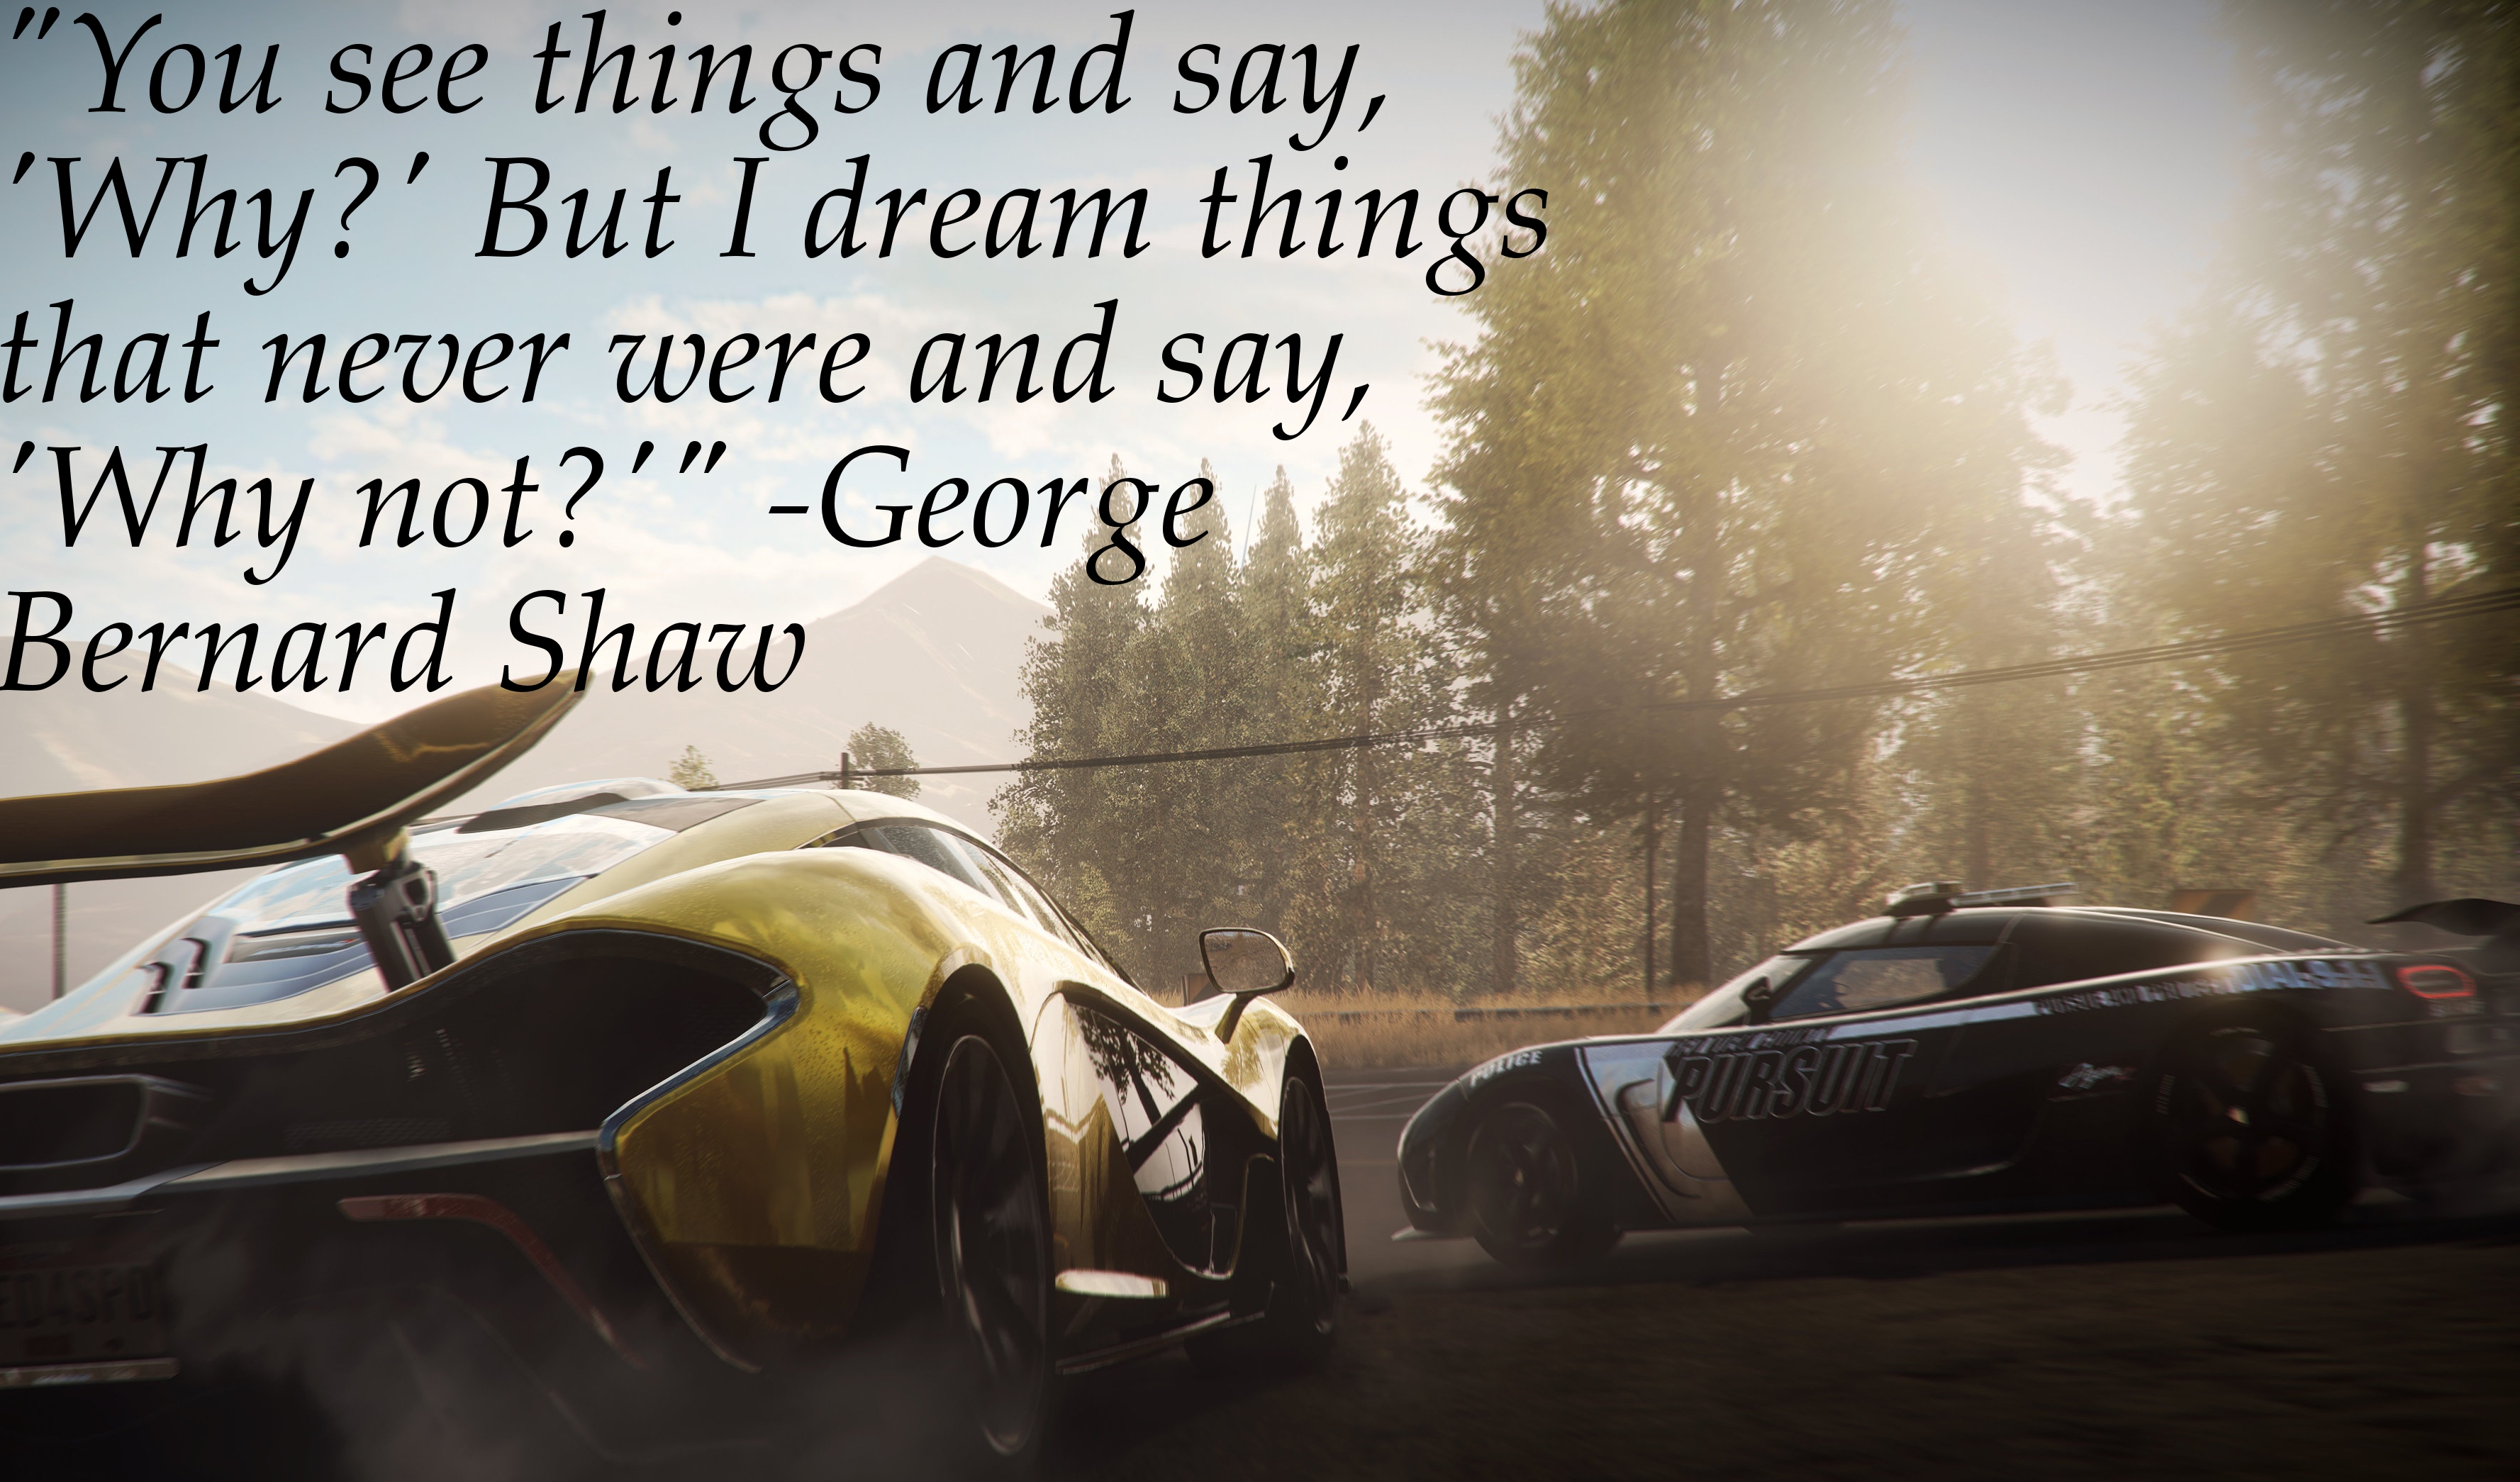 NFS: Rivals Quotes